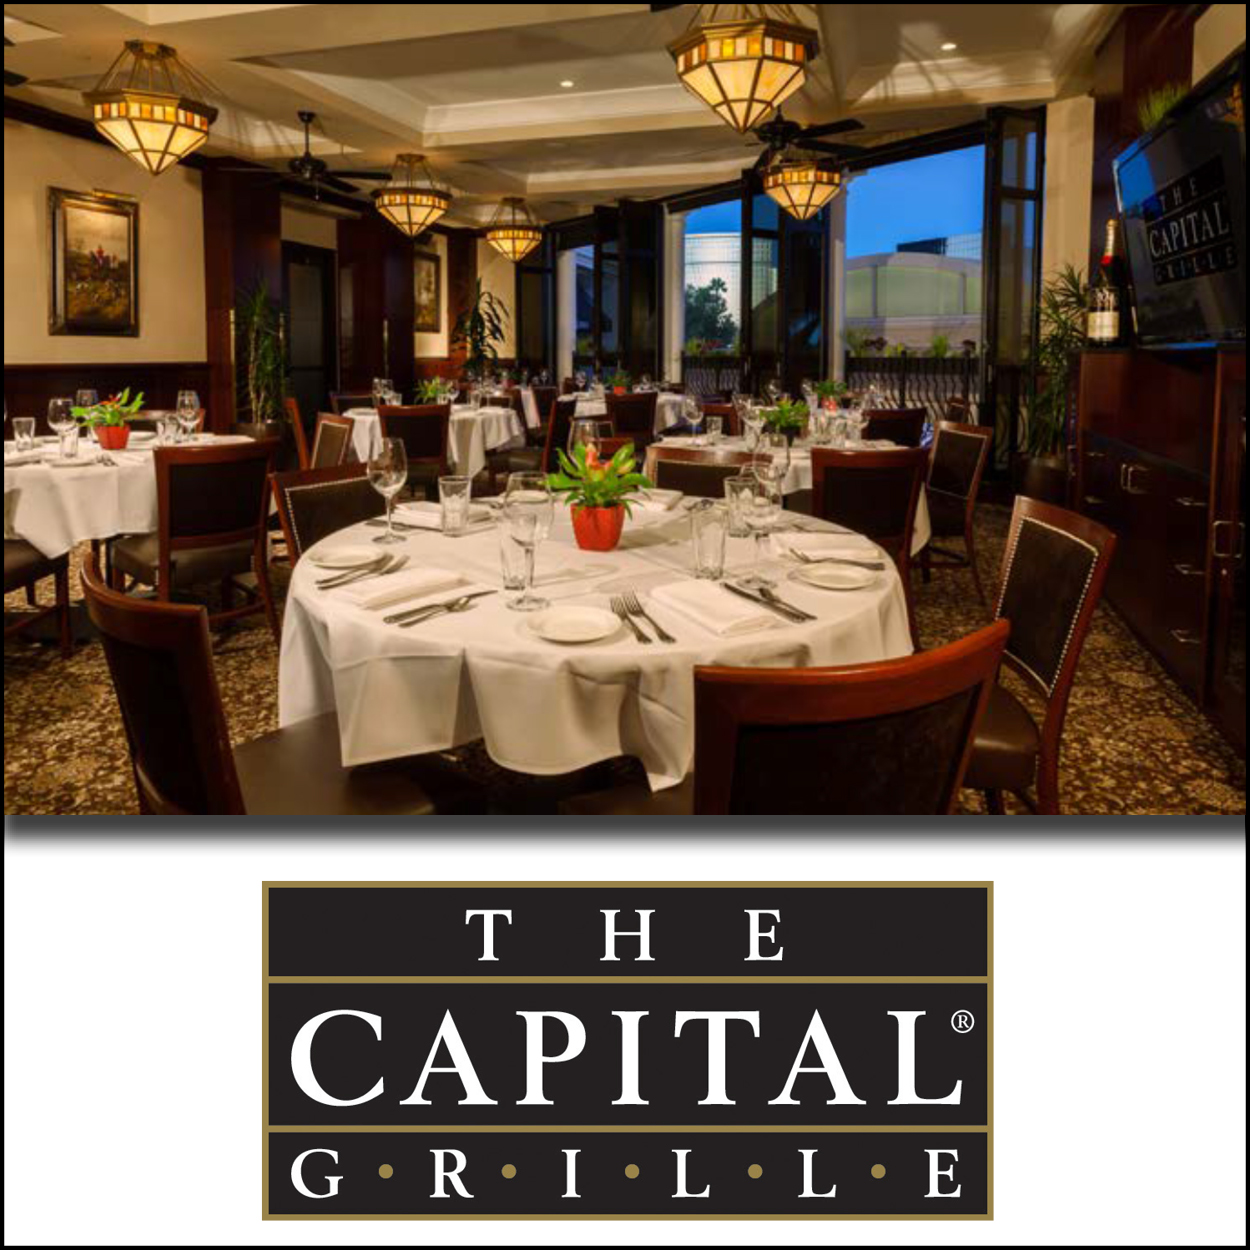 November Sunset Networking Mixer - The Capital Grille